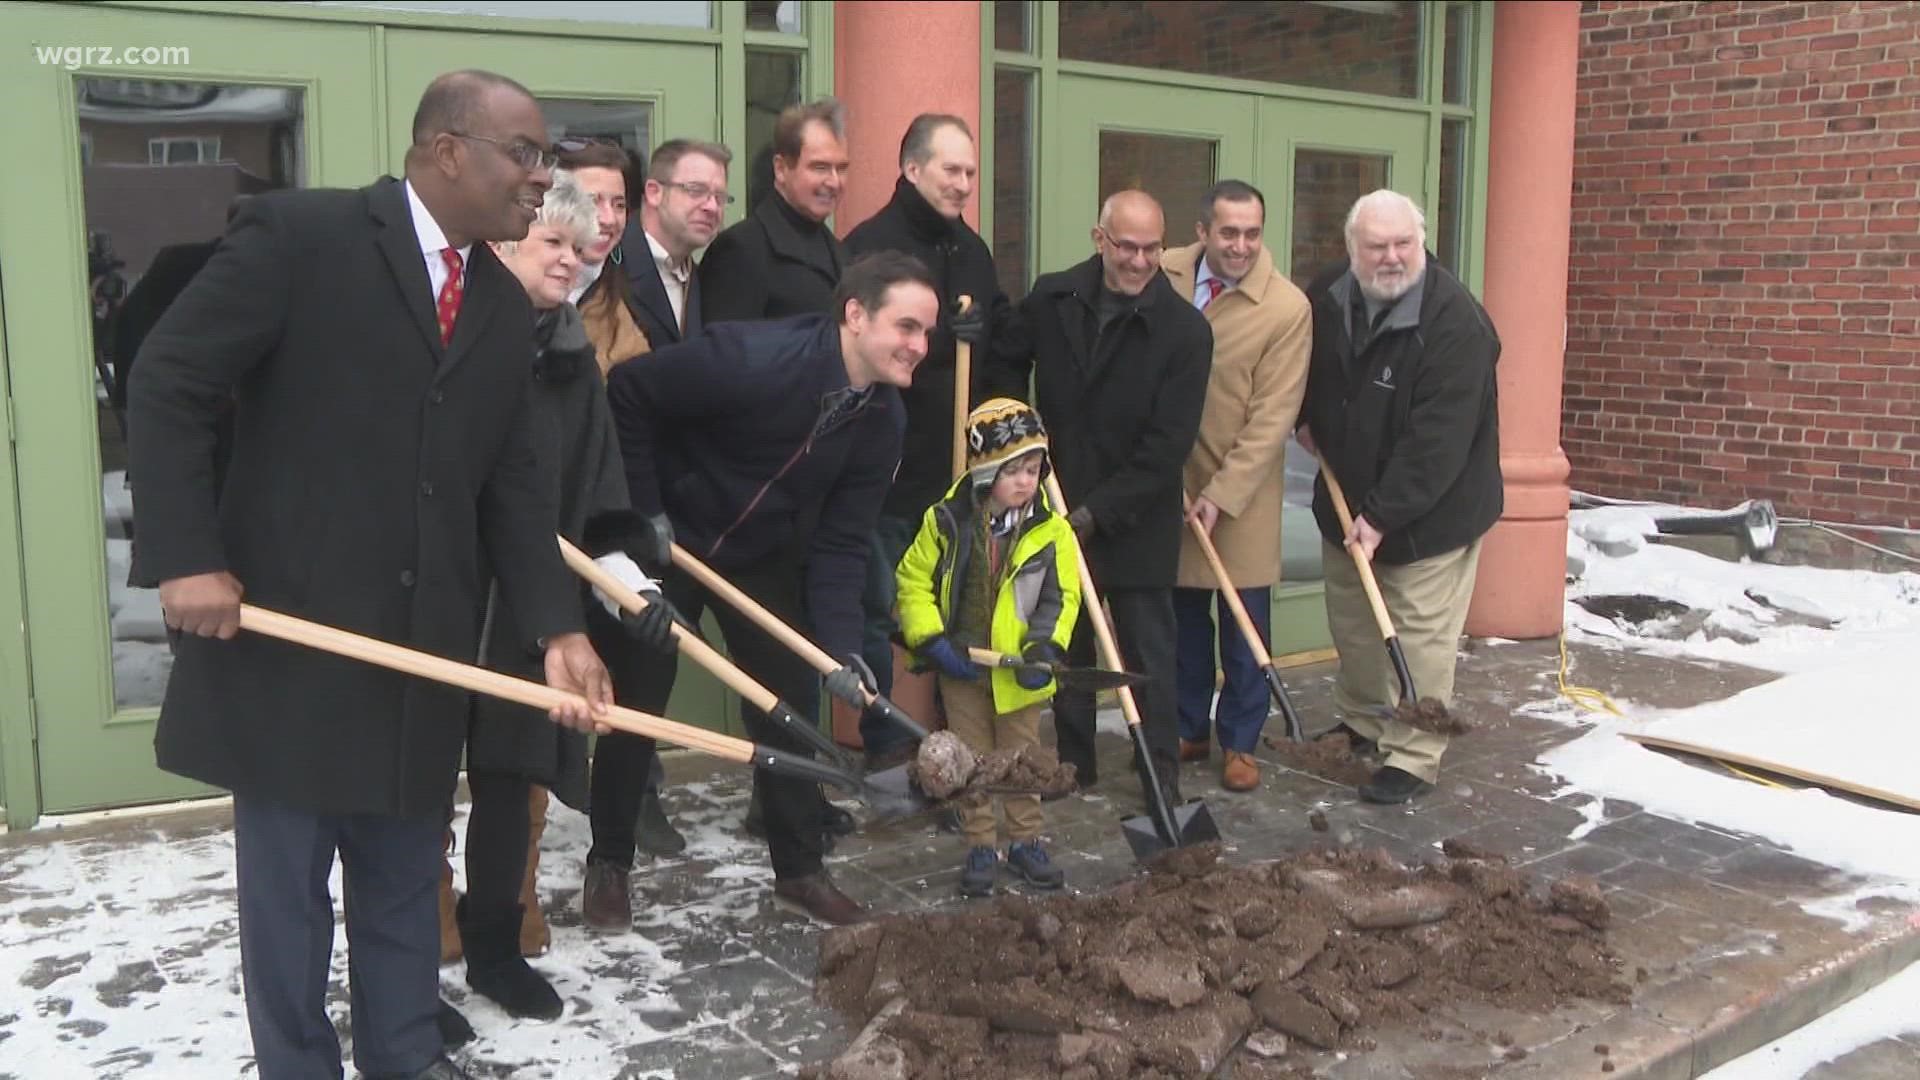 Ristorante Lombardo held a groundbreaking this afternoon on Hertel Avenue for an expansion on their restaurant.